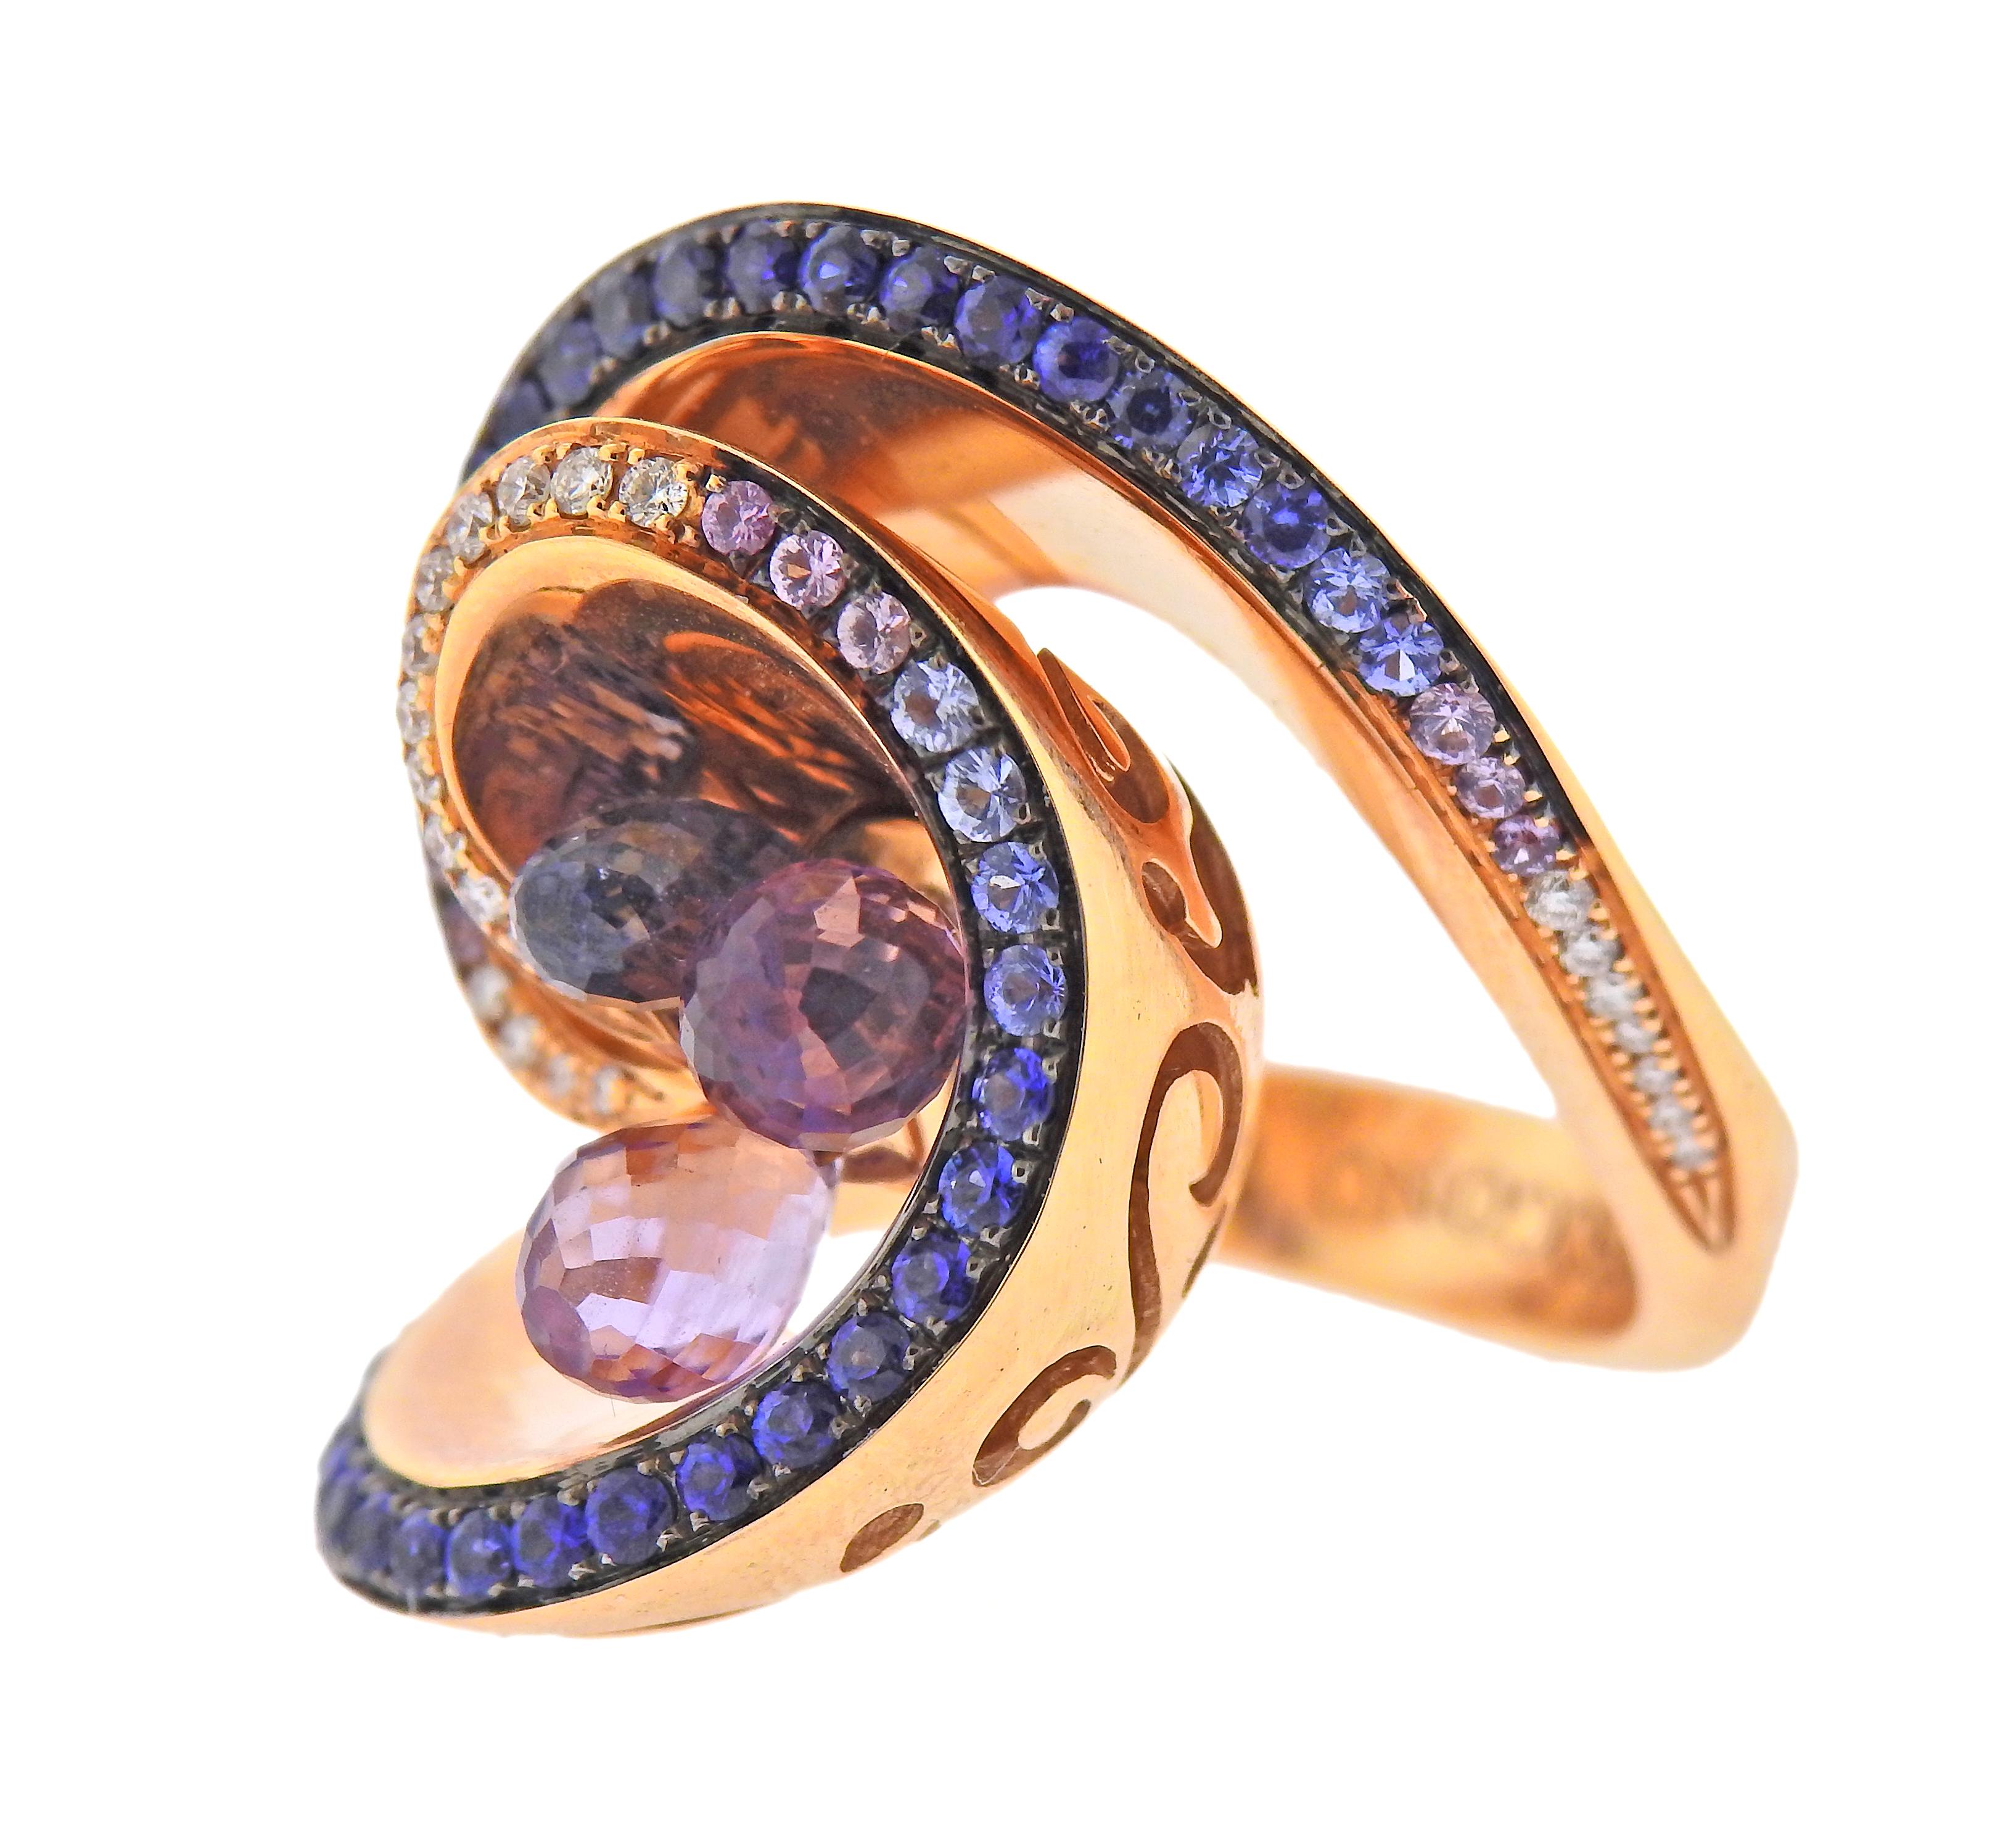 Brand new 18k rose gold multicolor gemstone Ring by De Grisogono. Set with 1.00ctw Amethyst briolettes, 0.50ctw Sapphire briolettes, 0.82ctw Sapphire, 0.16ctw of VS/G Diamonds. Ring size - 5.5 (50), ring top - 25mm wide. Marked - de Grisogono,